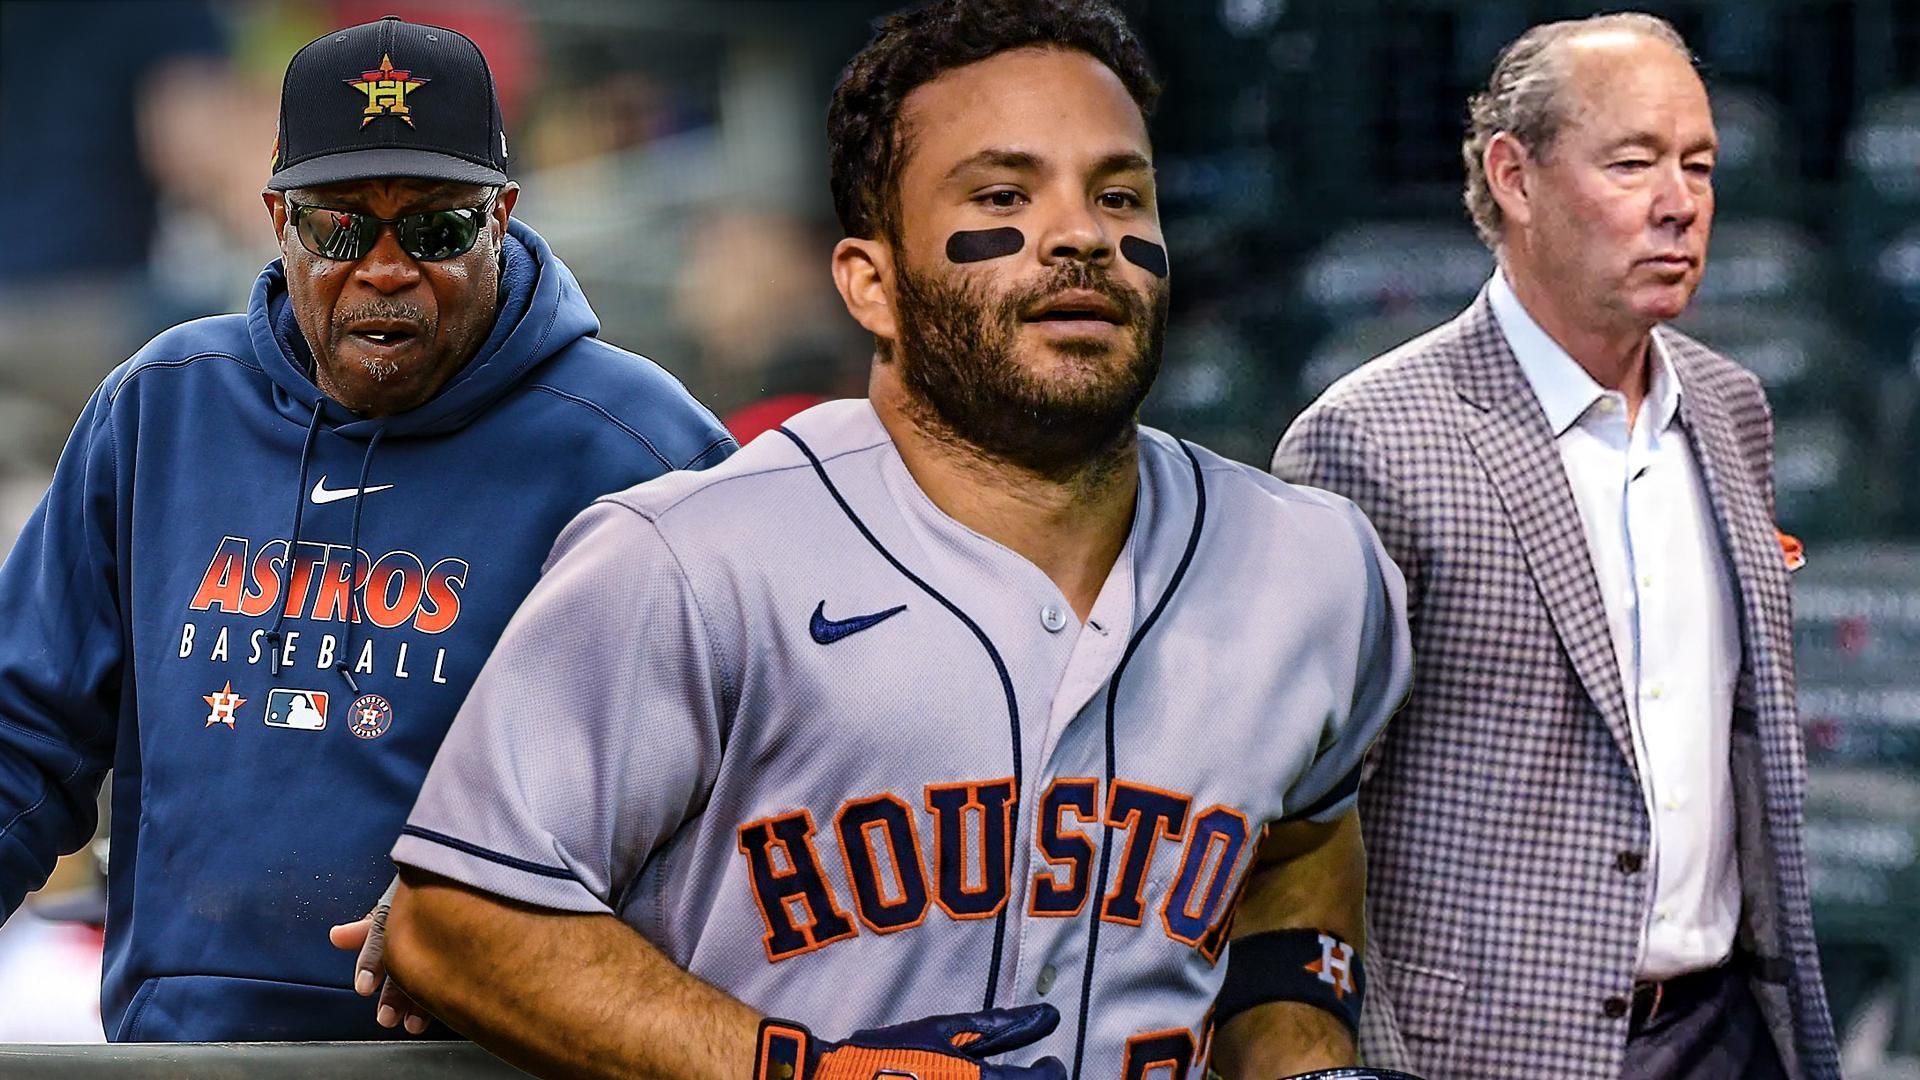 Astros finalizing a huge splash in free agency, per reports